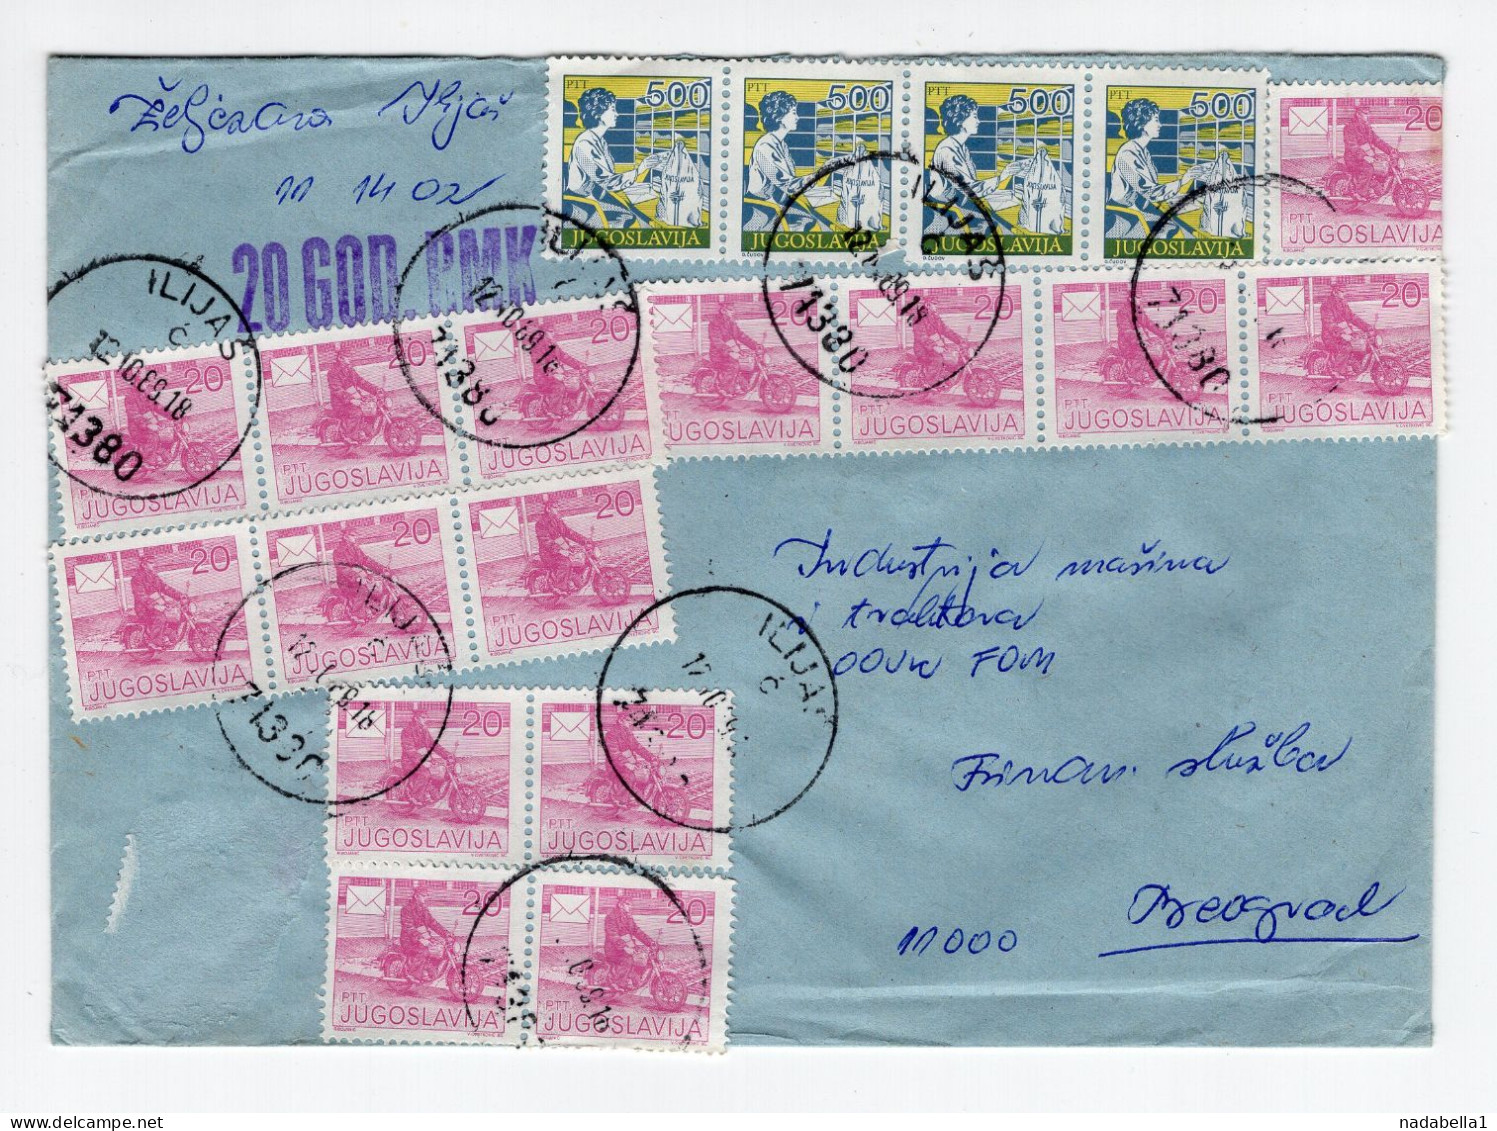 1989. YUGOSLAVIA,BOSNIA,ILIJAS,COVER SENT TO BELGRADE,2300 DIN. FRANKING,INFLATION MAIL - Covers & Documents